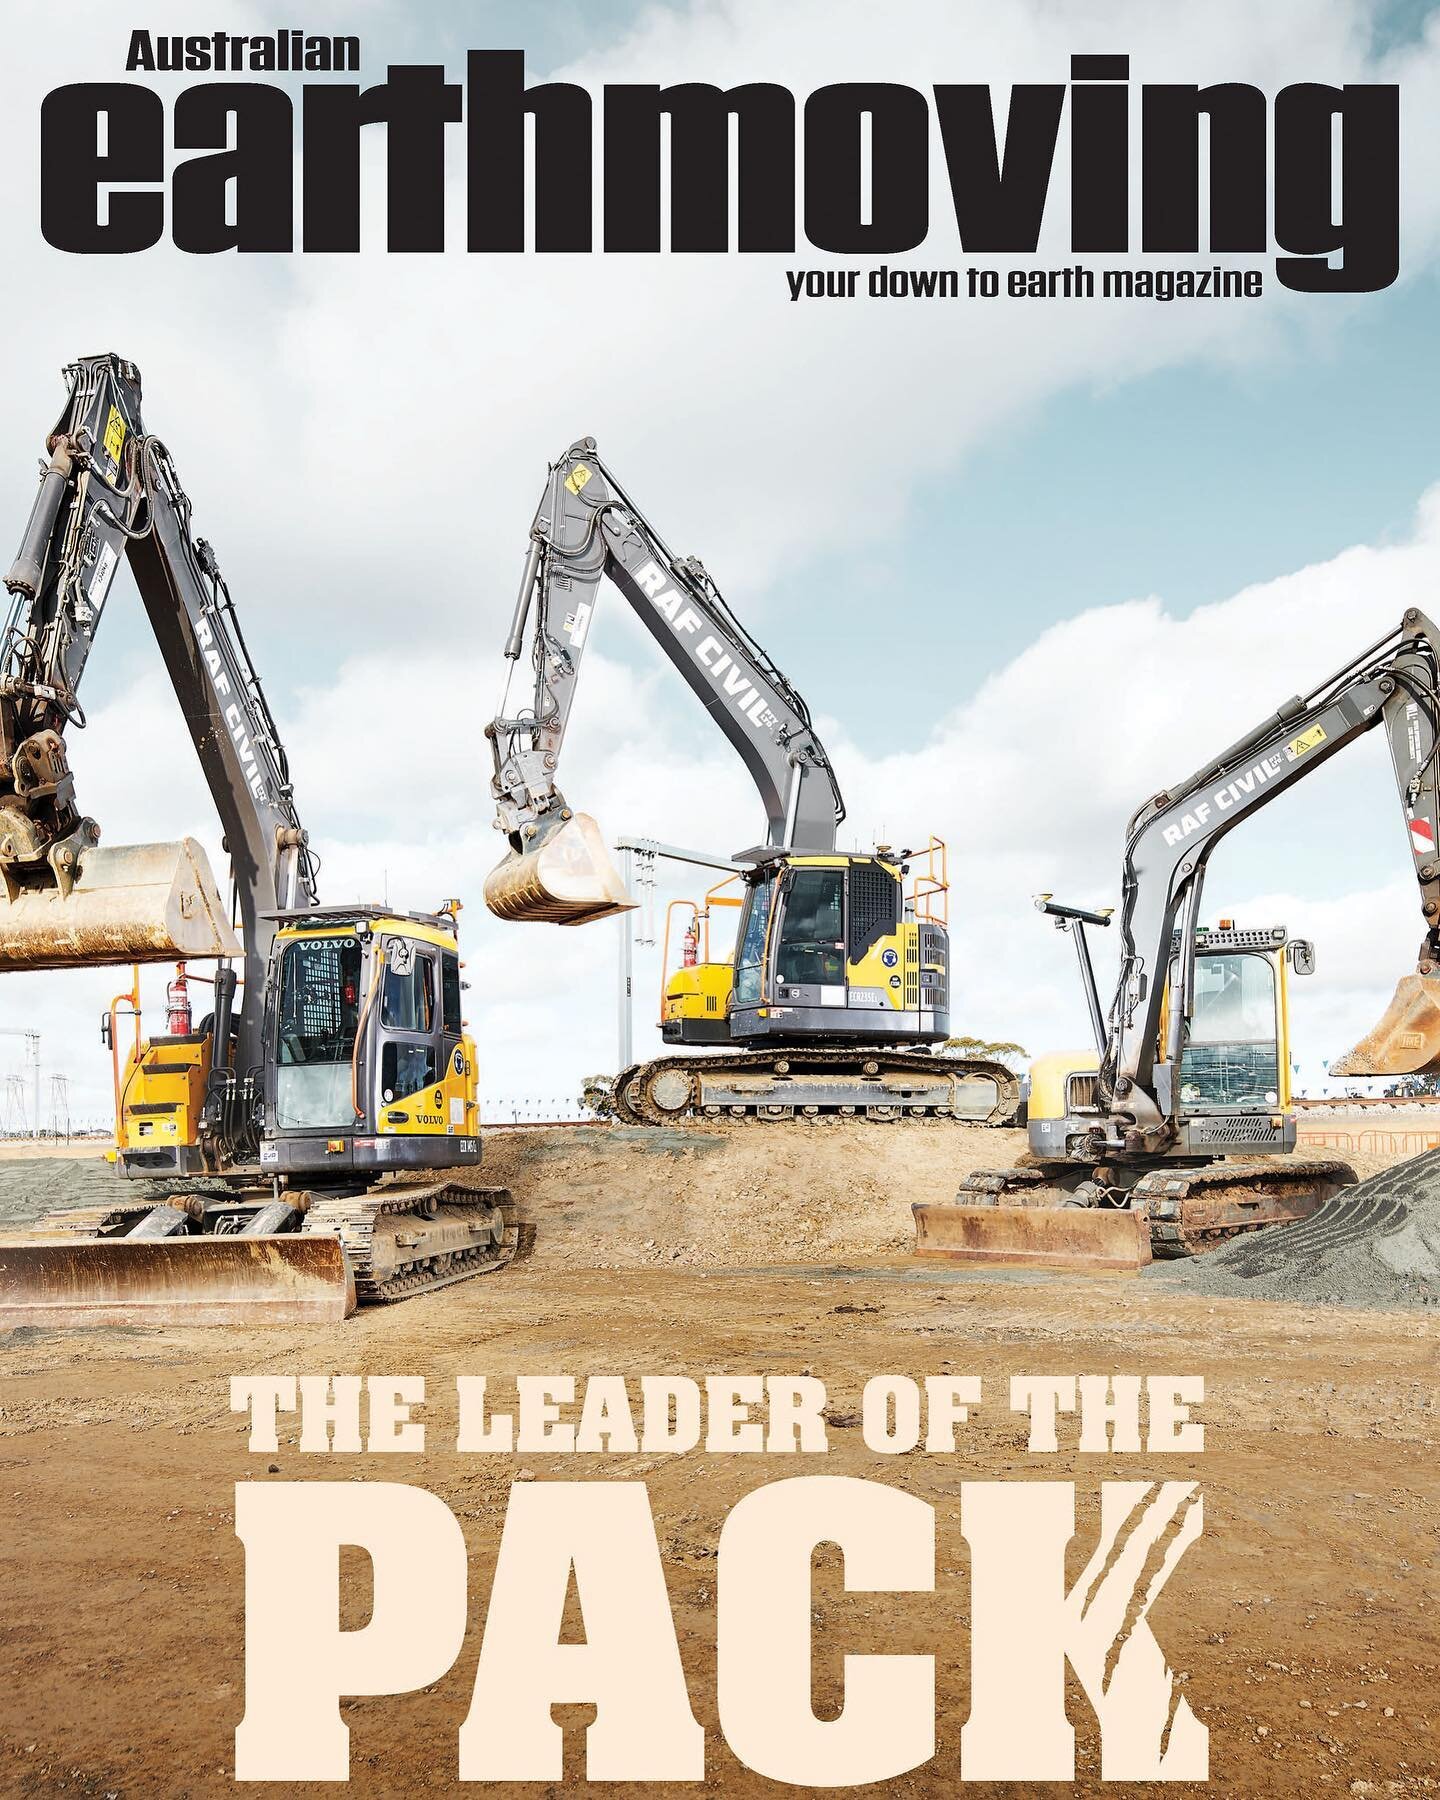 Getting down and dirty for the cover of the latest issue of @australian_earthmoving magazine, featuring @raf_civil &lsquo;s brand new Volvo ECR235EL from @cjd_equipment. 

A great shoot, out in the big sandbox, back when the sunshine was around!

Get